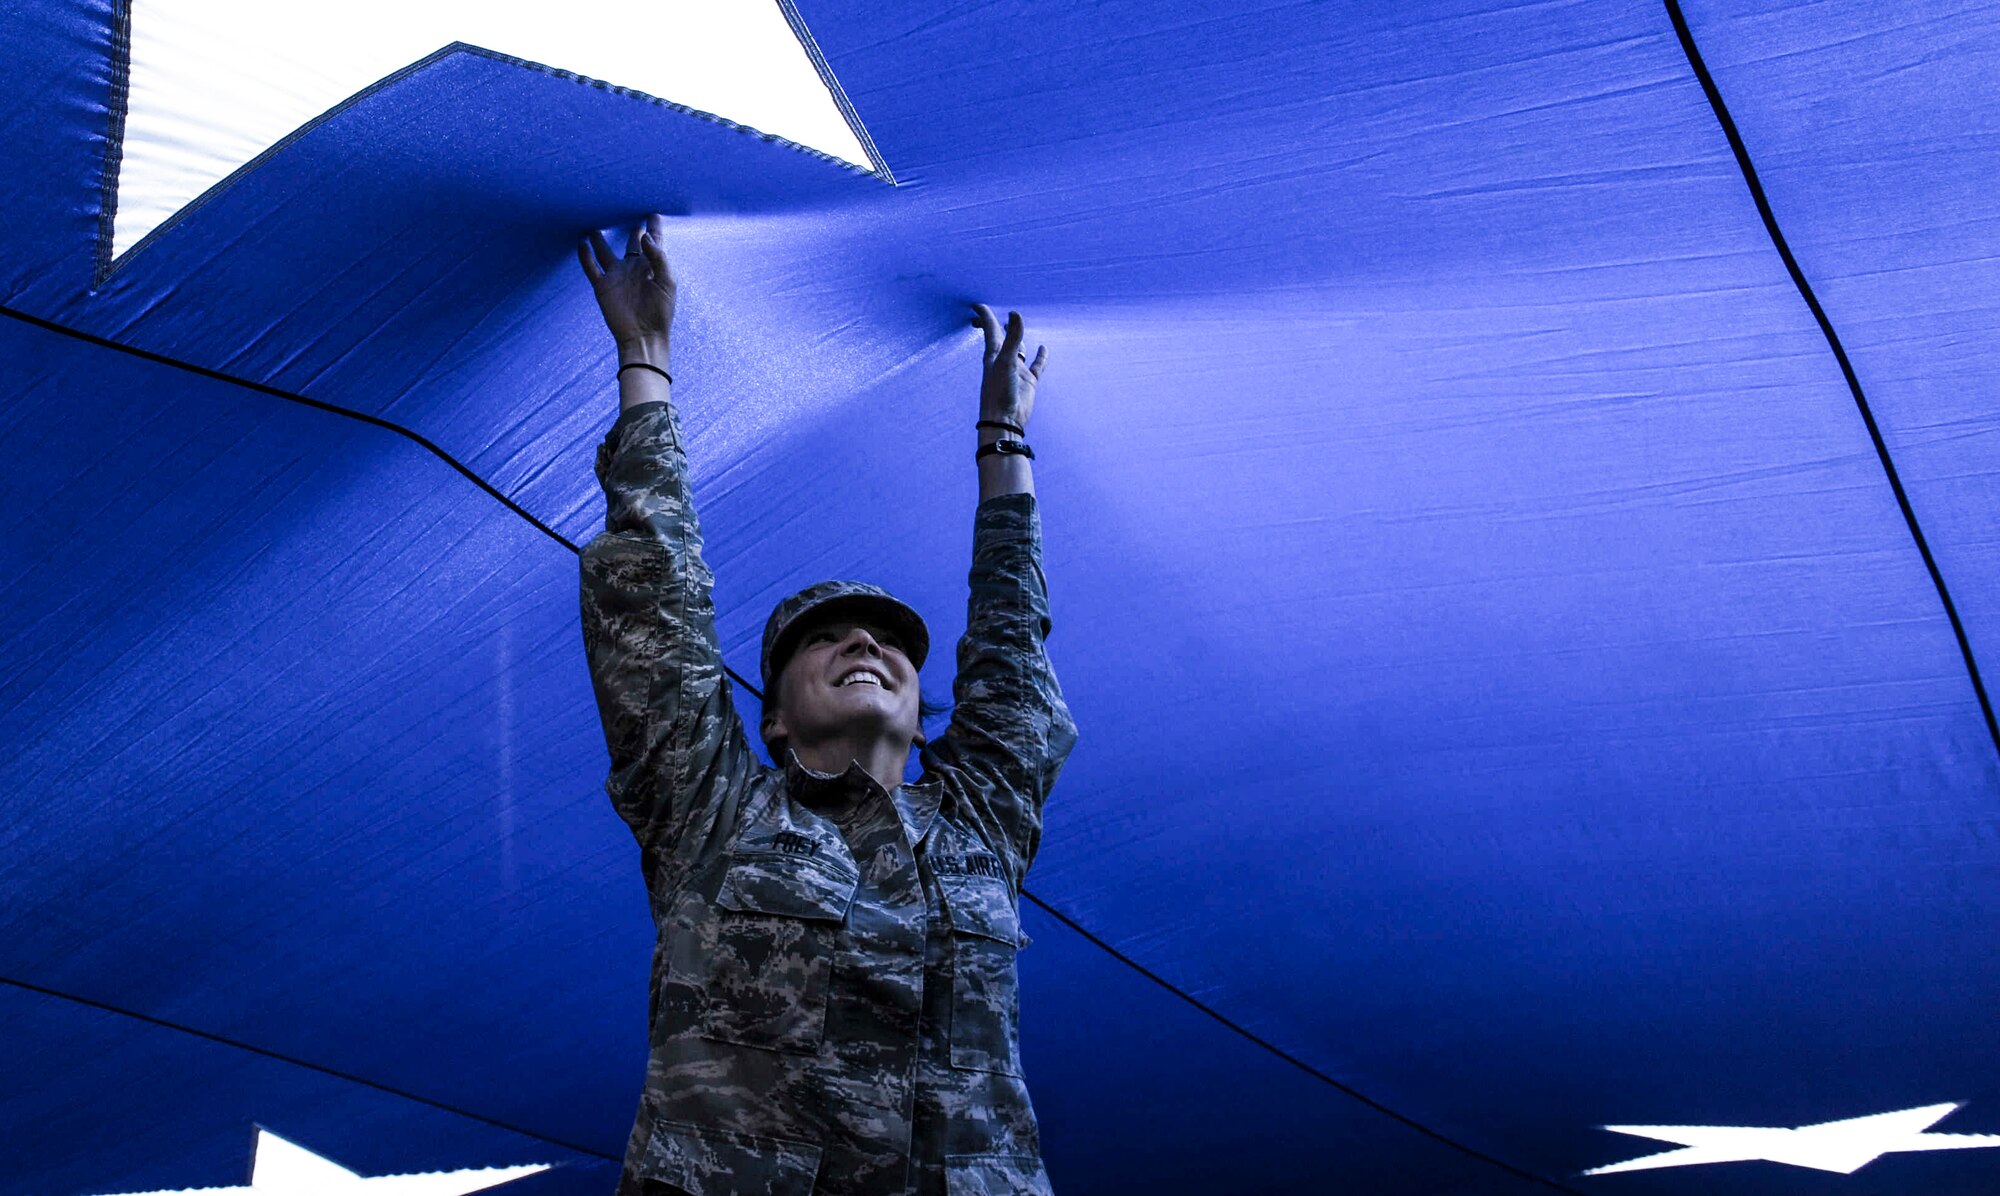 An Airman holds up the American flag at Sam Boyd Stadium before the Las Vegas Bowl, Dec. 17, 2016. The oversized American flag weighed nearly one thousand pounds and needed over 150 Airmen to hold. (U.S. Air Force photo by Airman 1st Class Kevin Tanenbaum/Released)